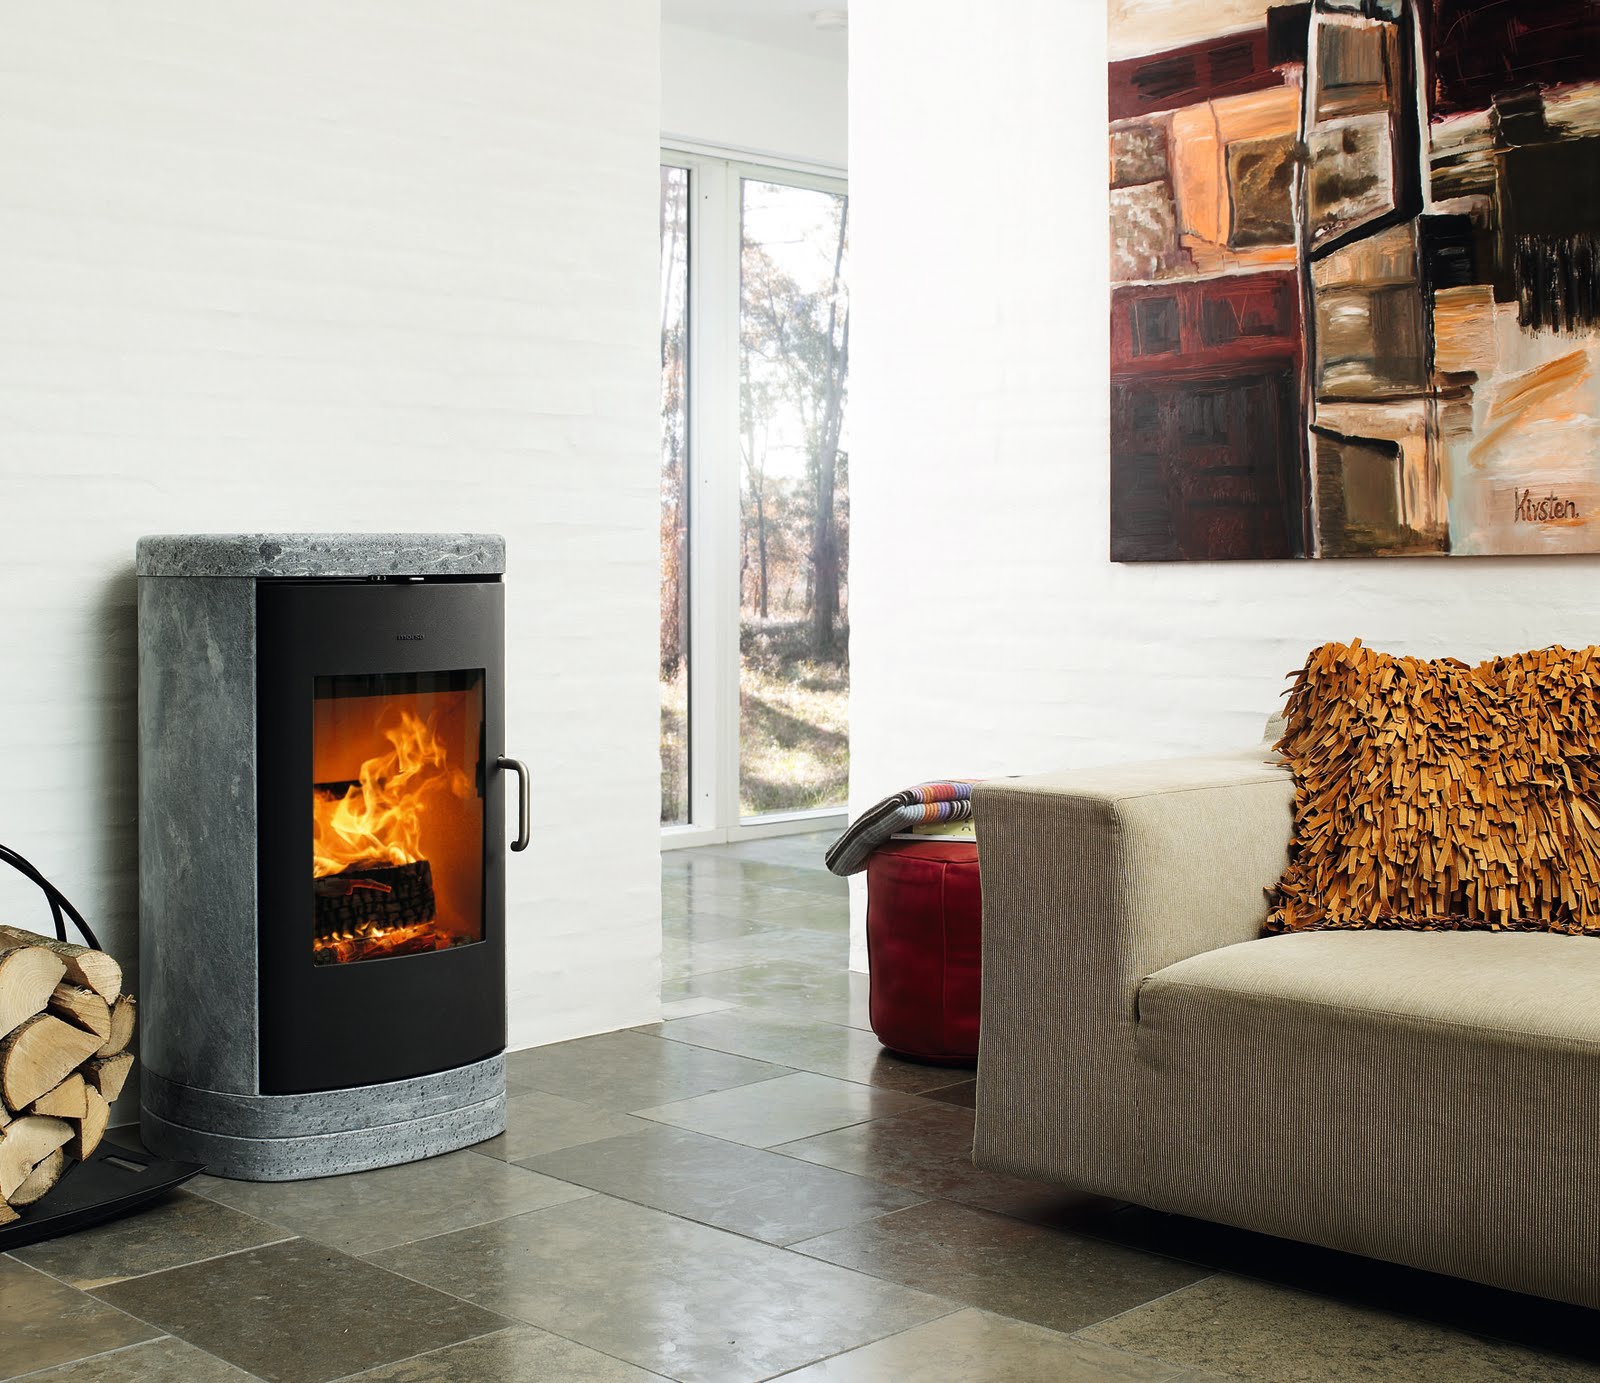 morso-energy-efficient-wood-stoves-october-2010